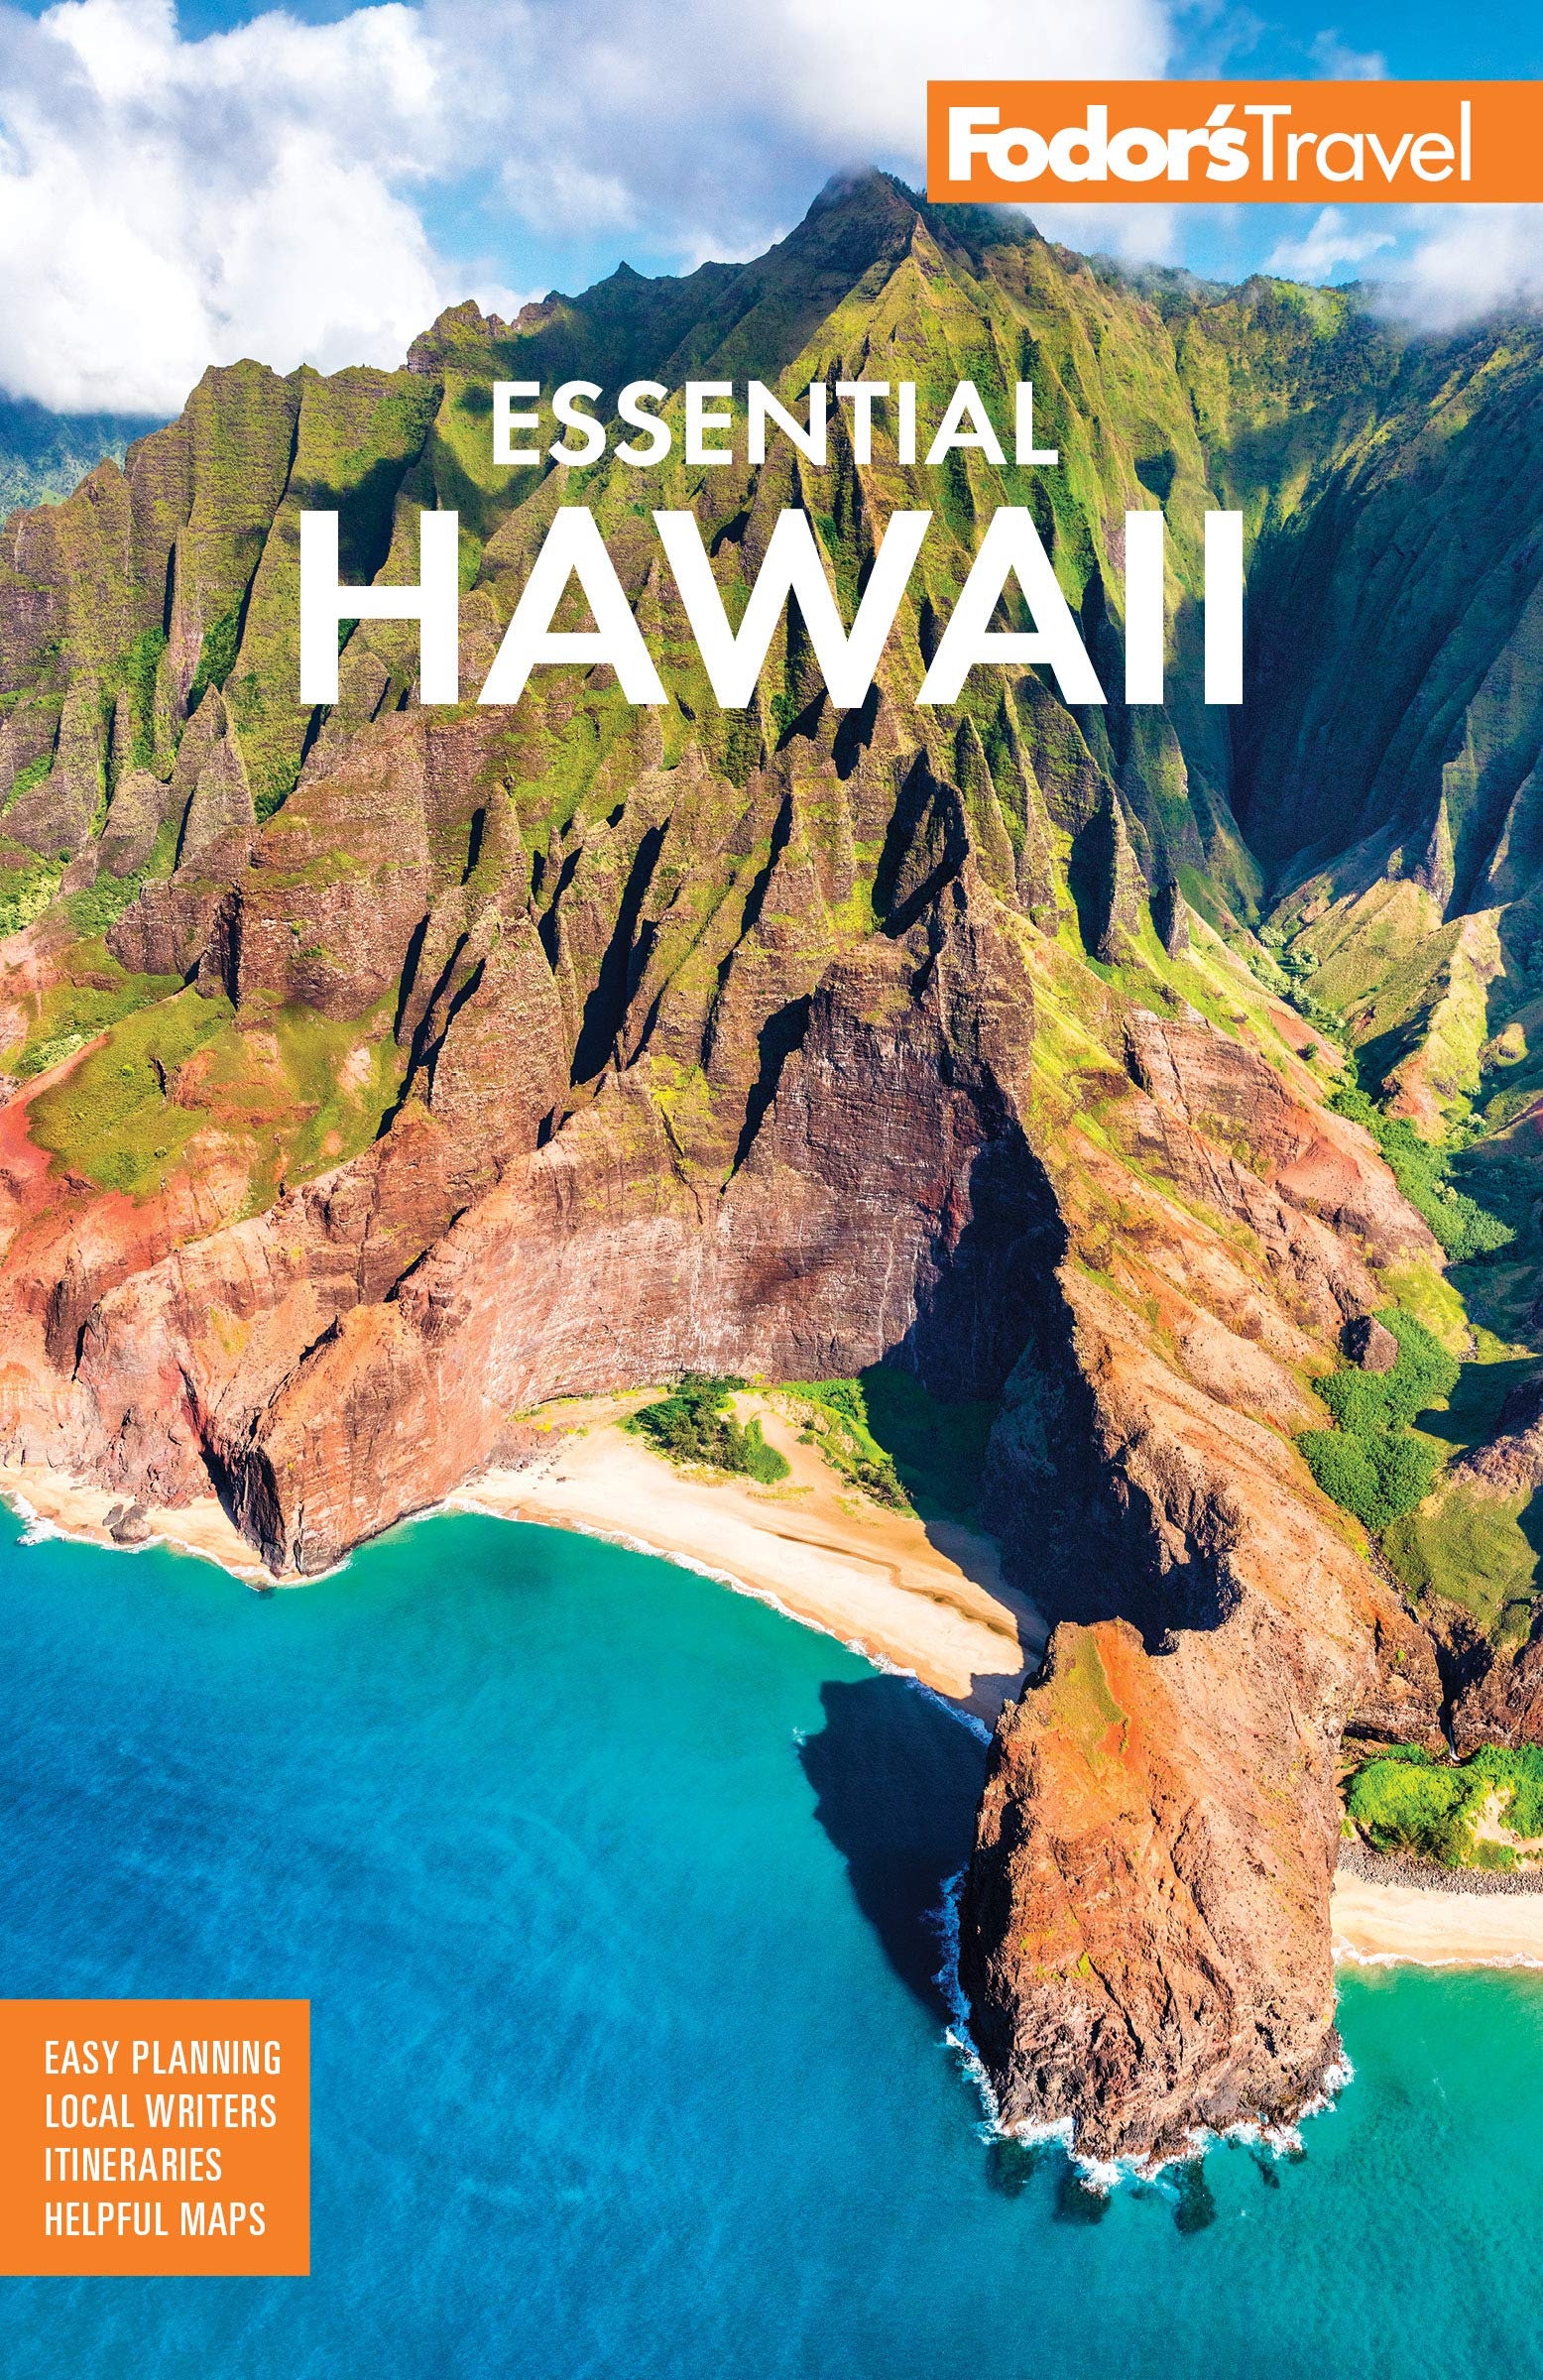 Safety Tips When Travelling in Hawaii